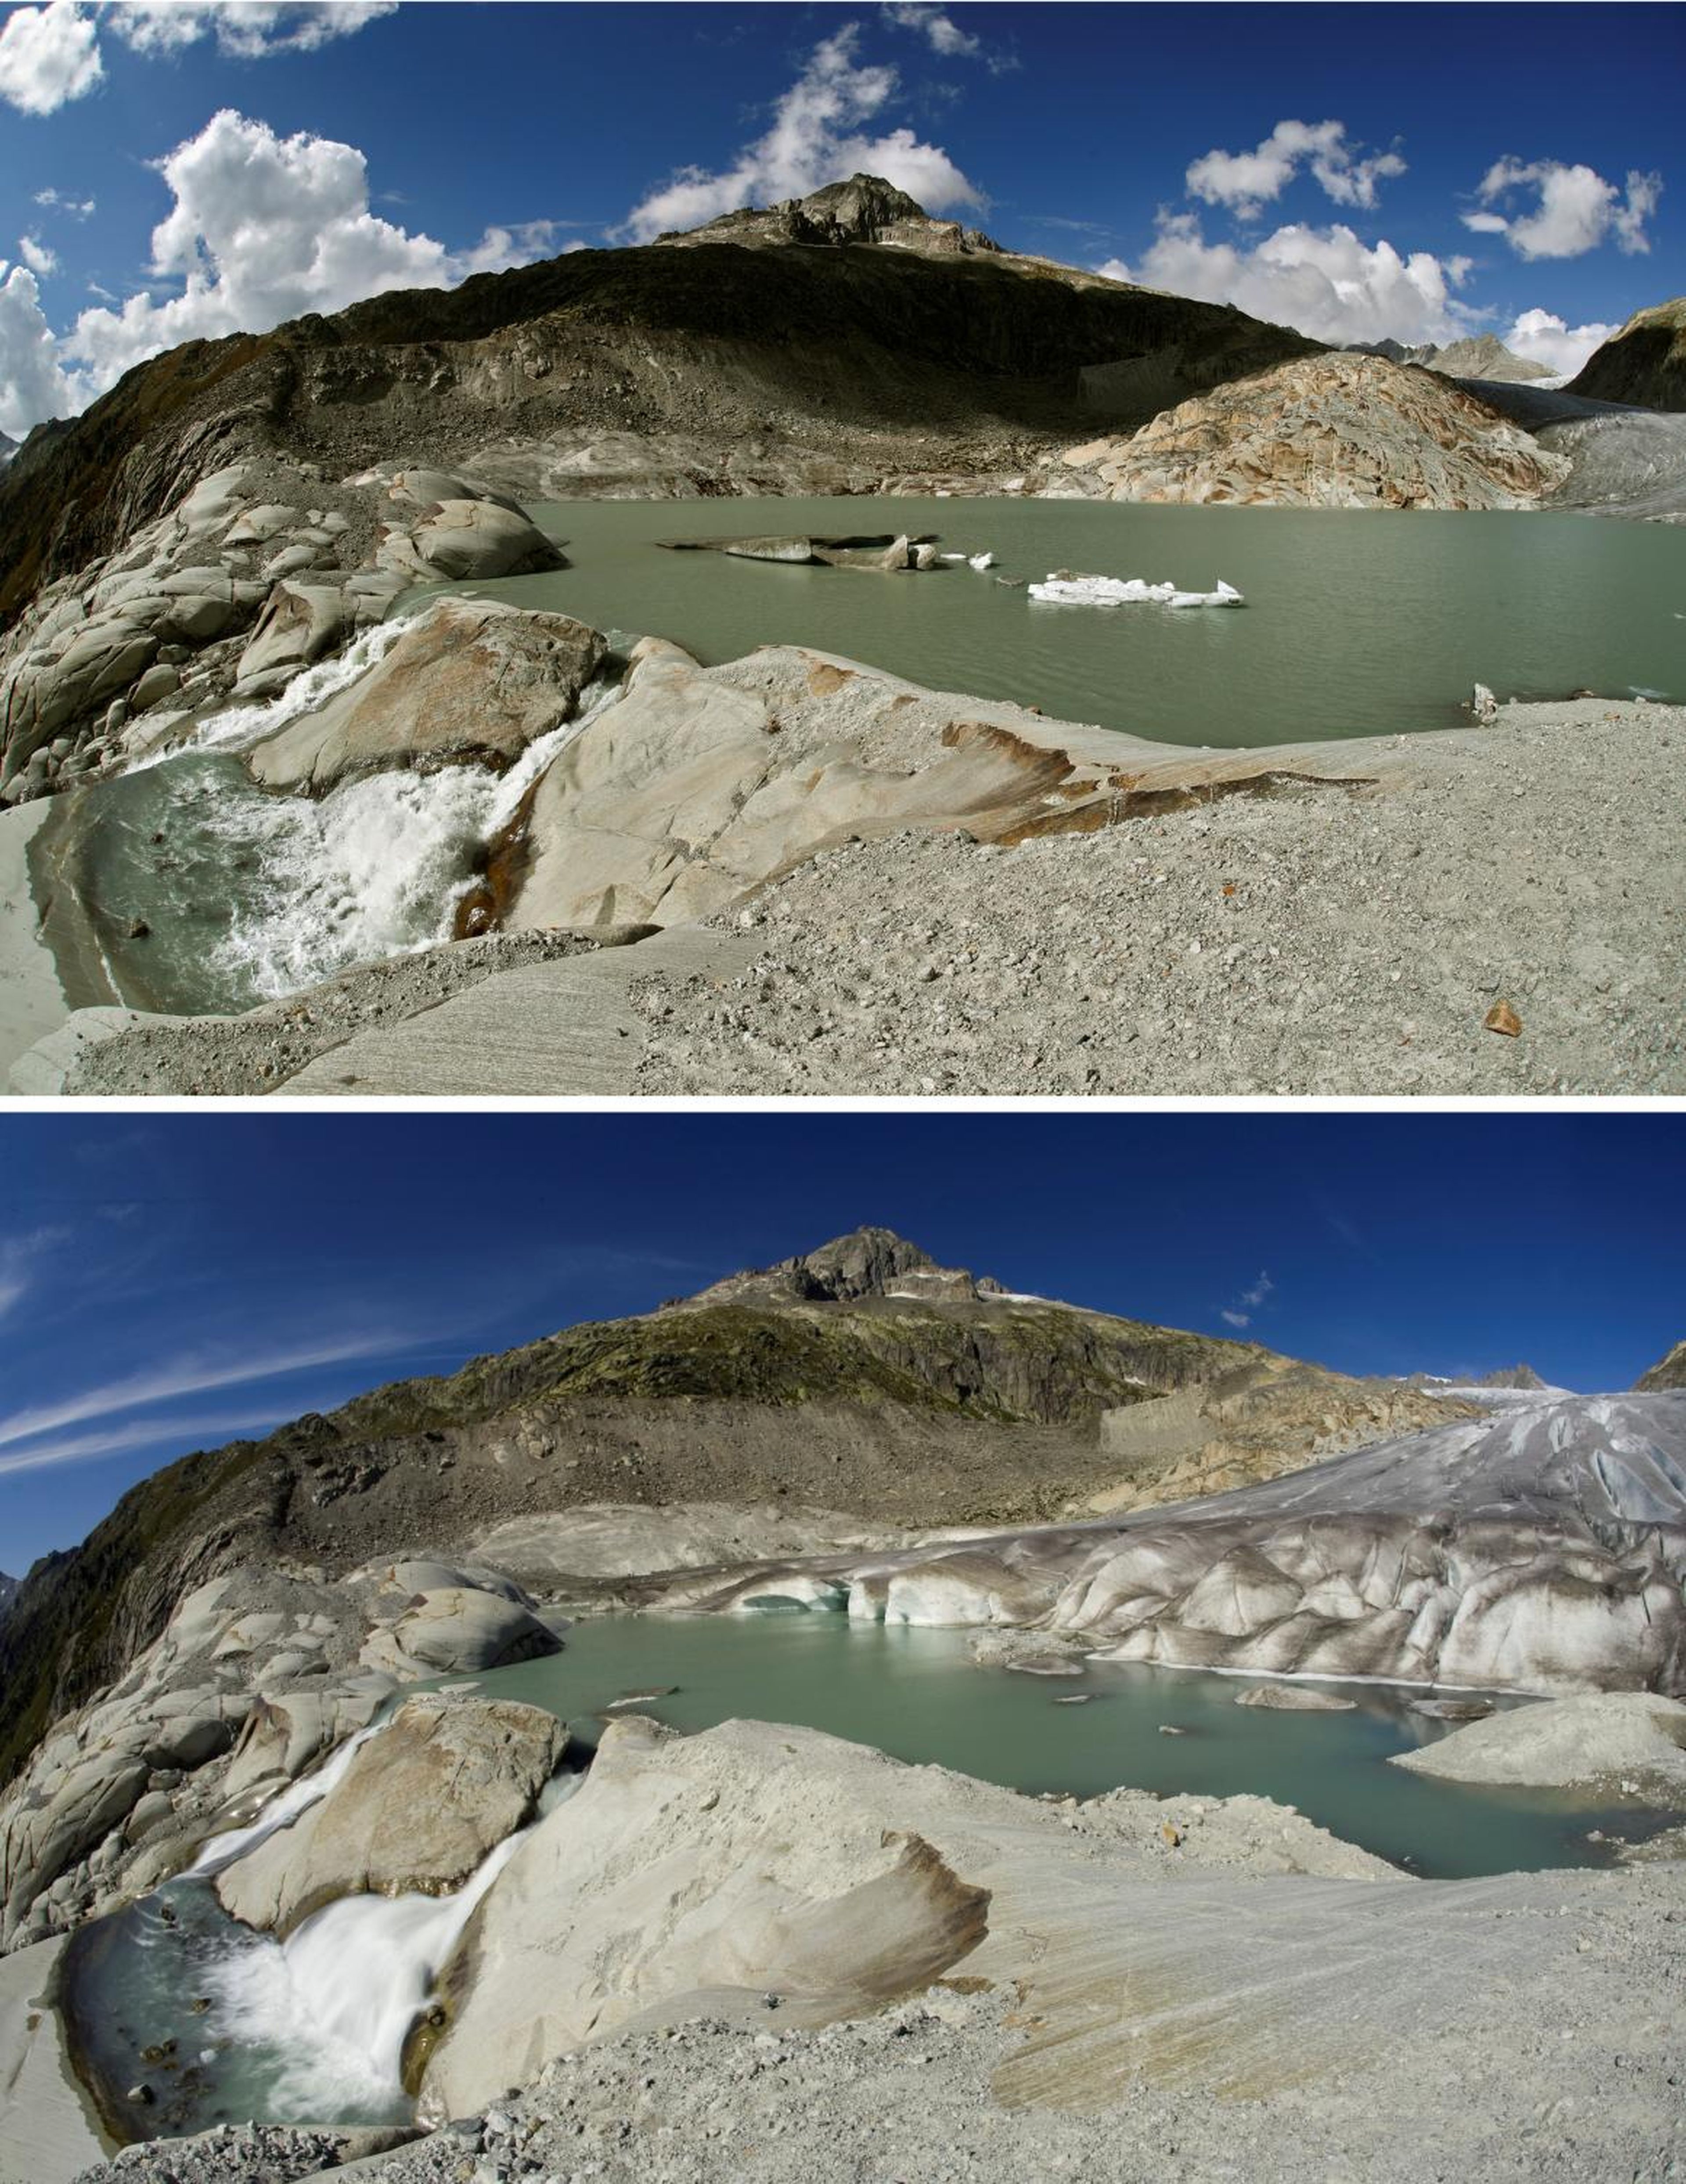 The Rhone Glacier is in the Furka Pass in Switzerland. The top photo was taken this year, while the bottom is from 2009.